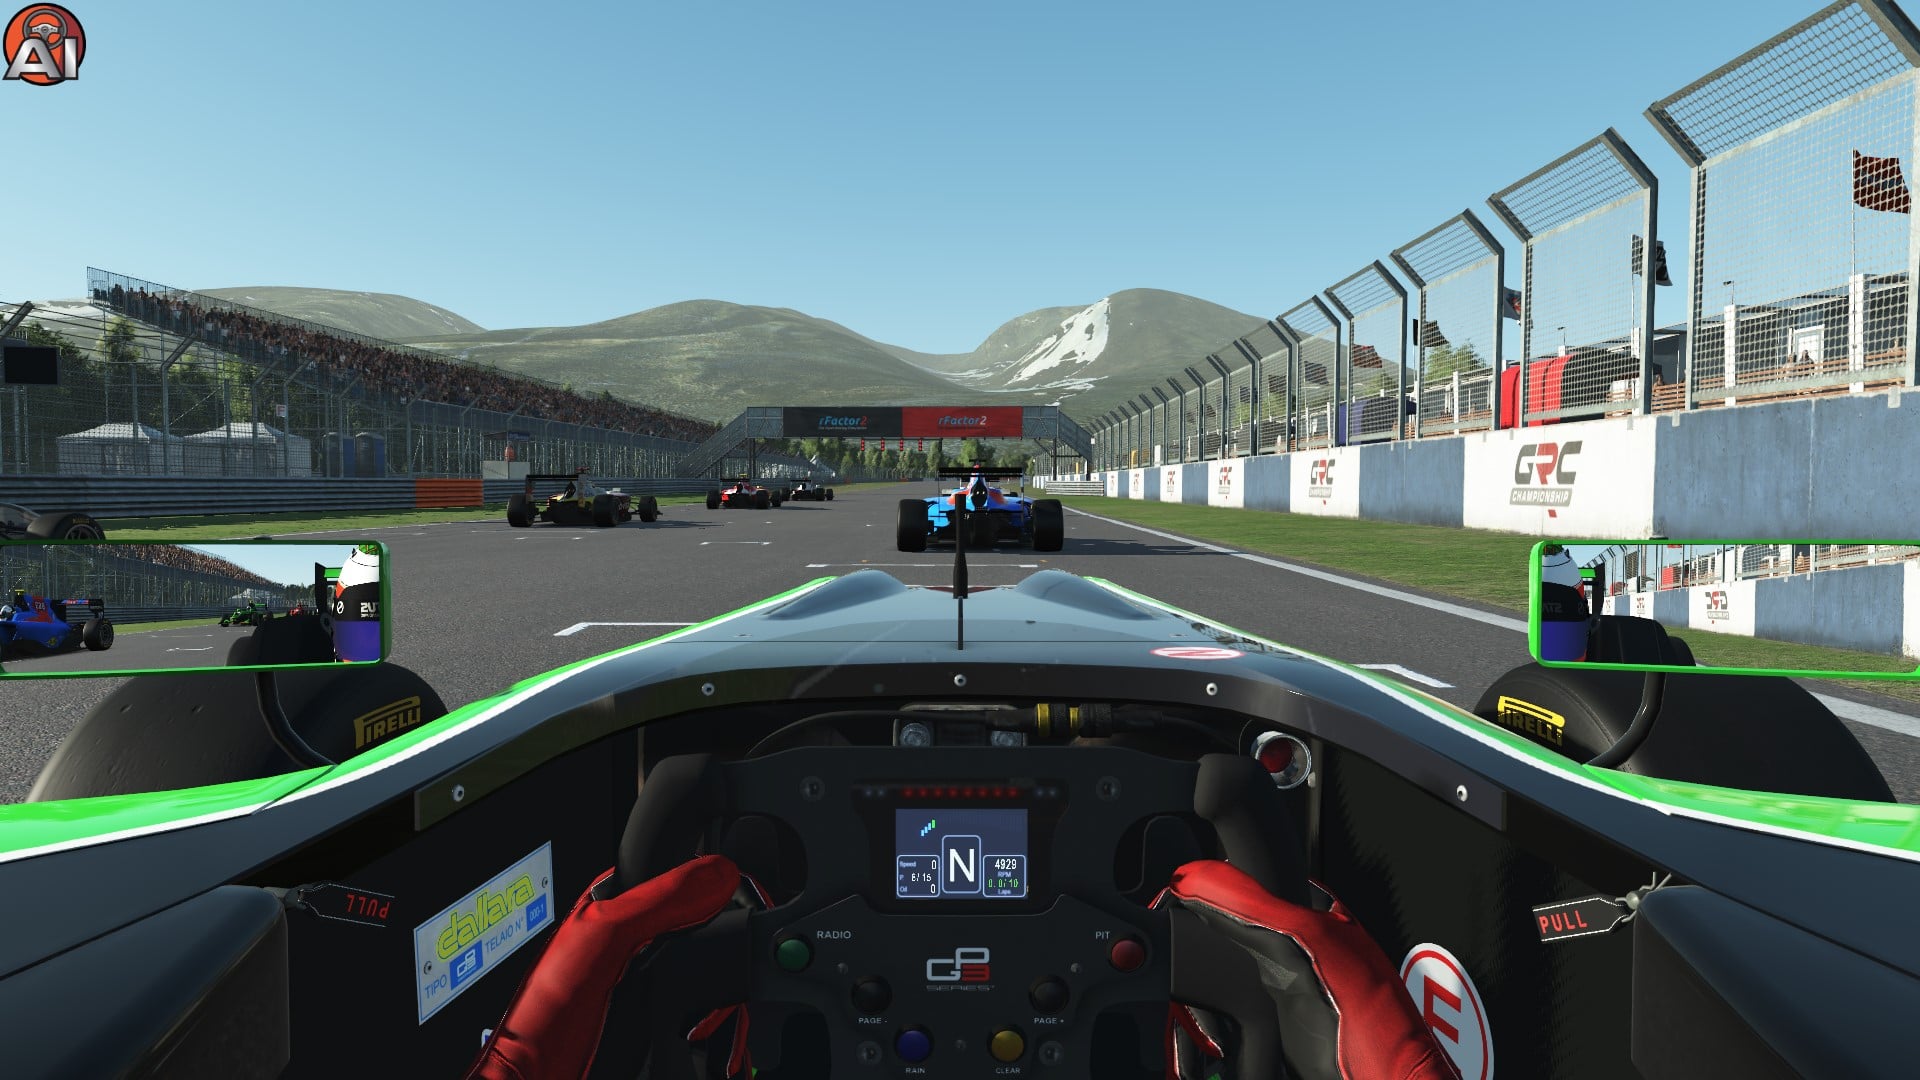 More information about "GP3 Series 2015 by ASR Formula disponibile per rFactor 2 ed Assetto Corsa"